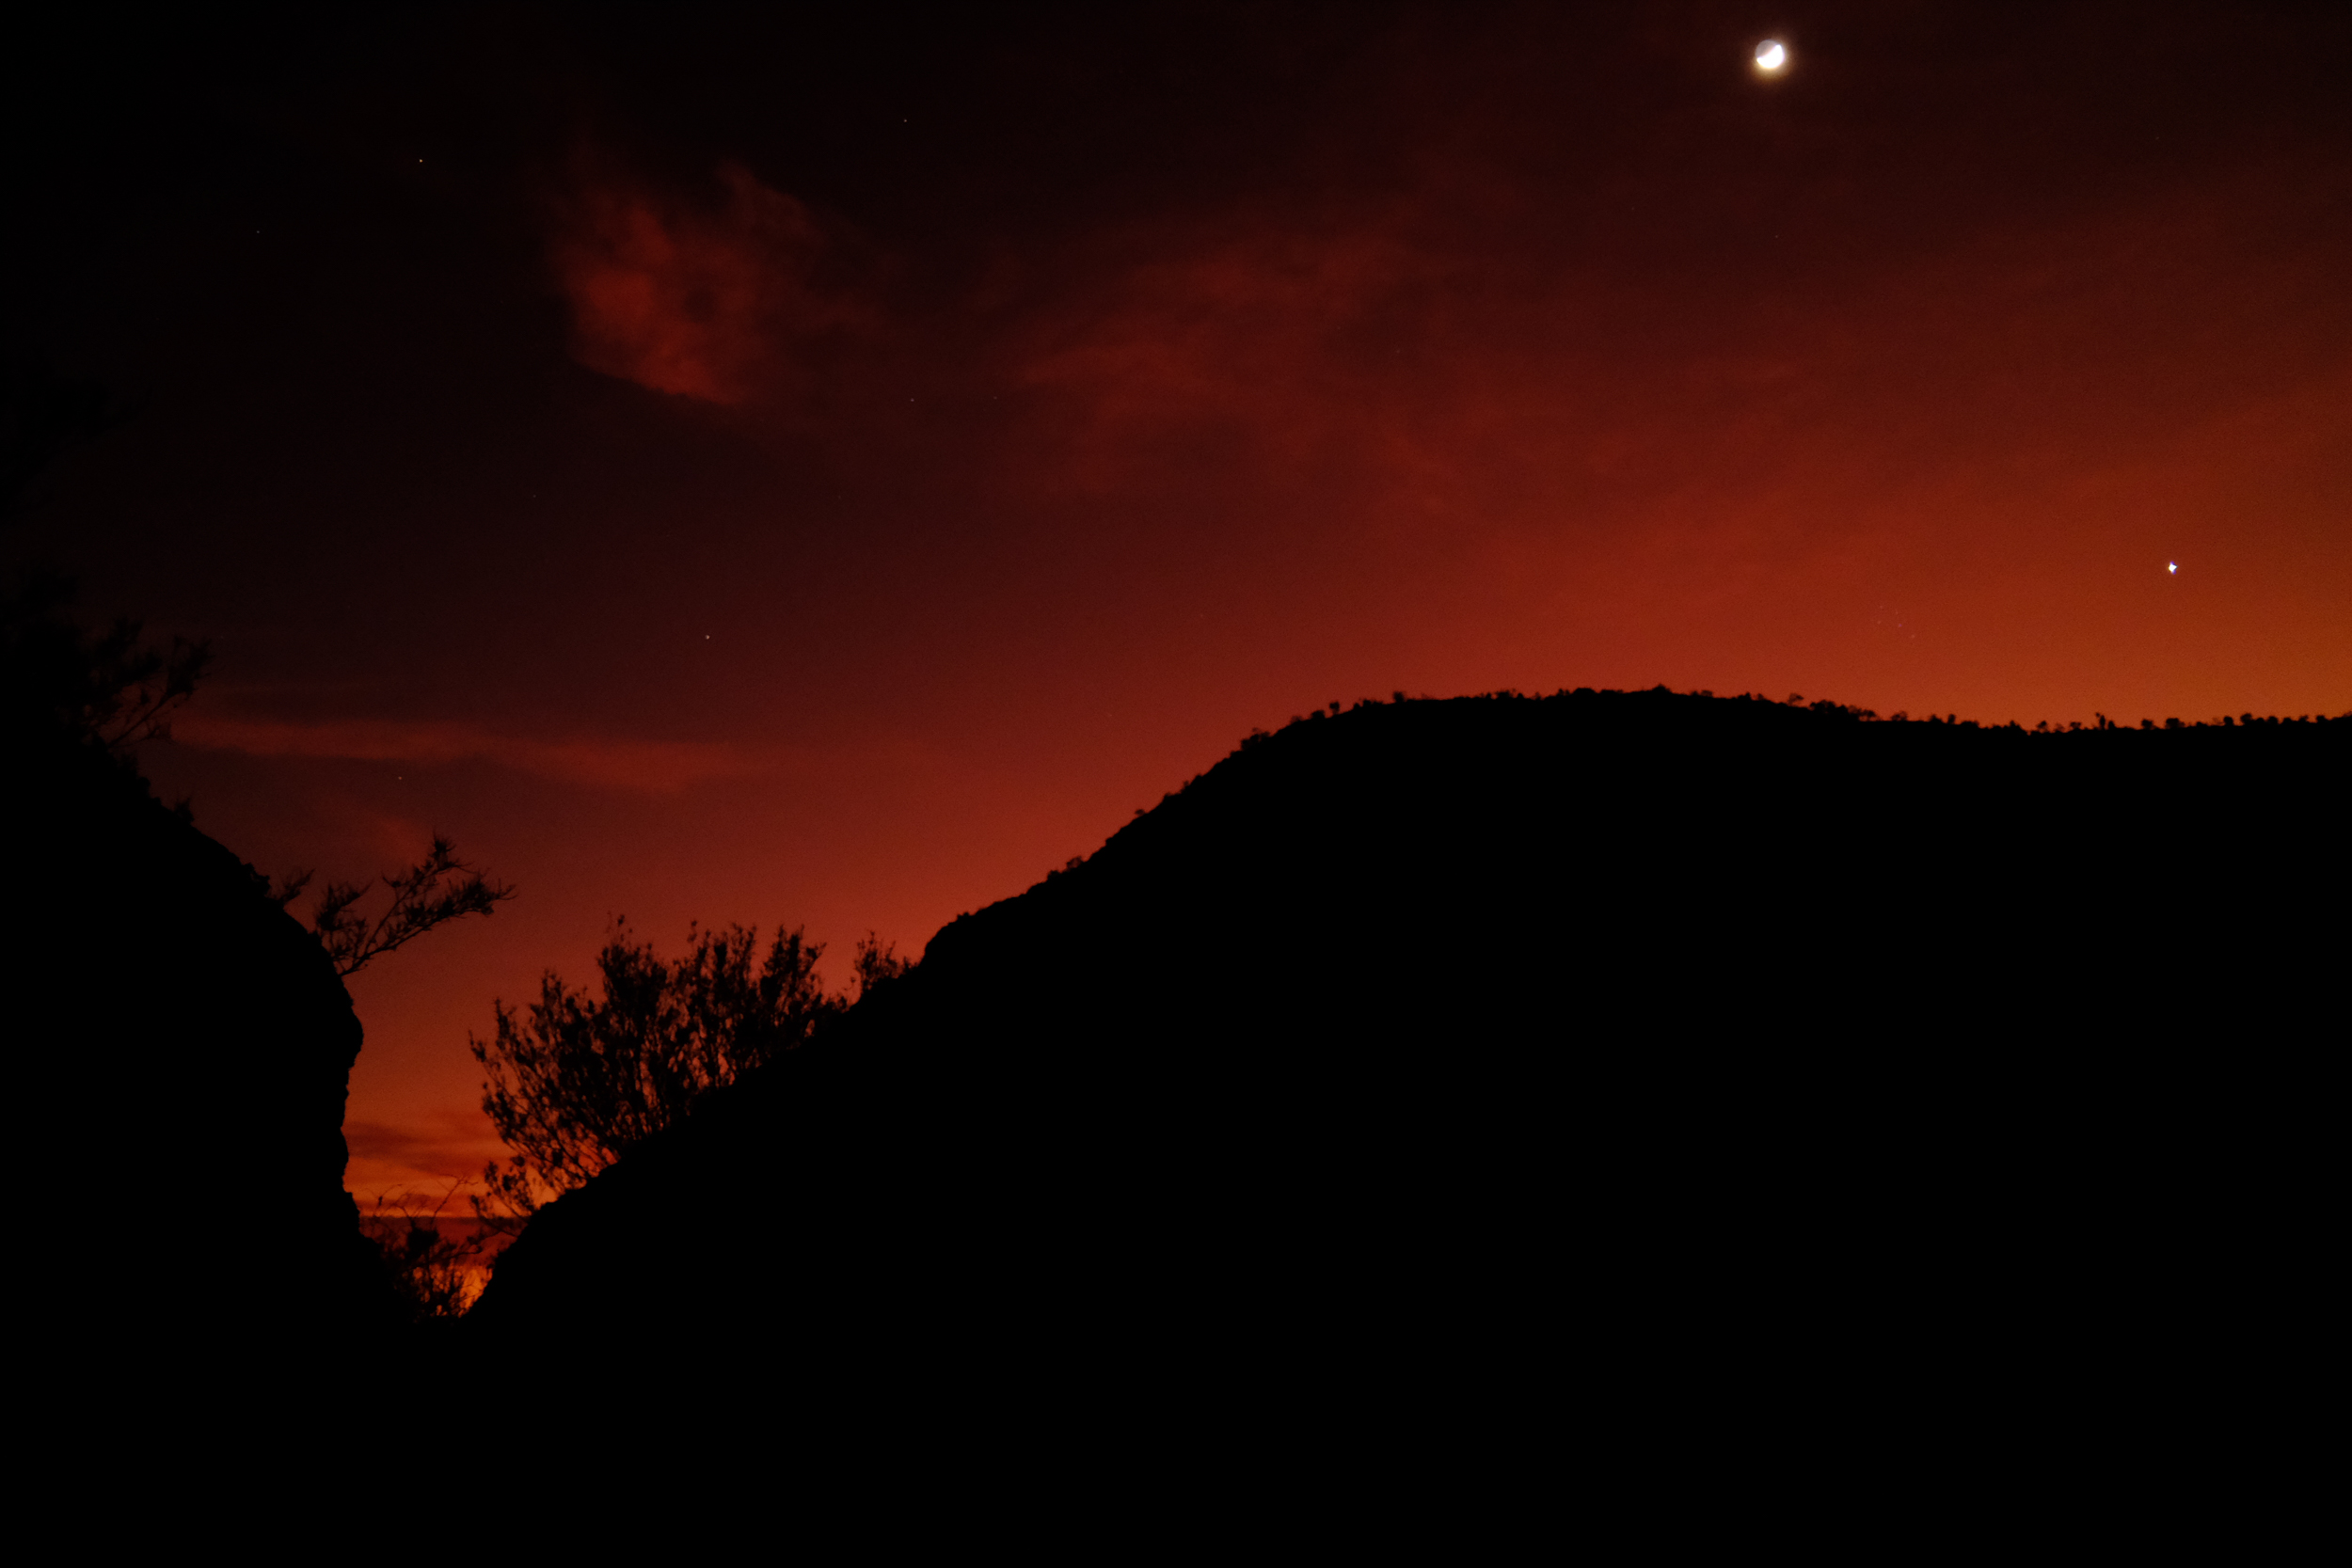 A photograph of the moon and one planet in the sky at dawn over cliffs in silhouette.